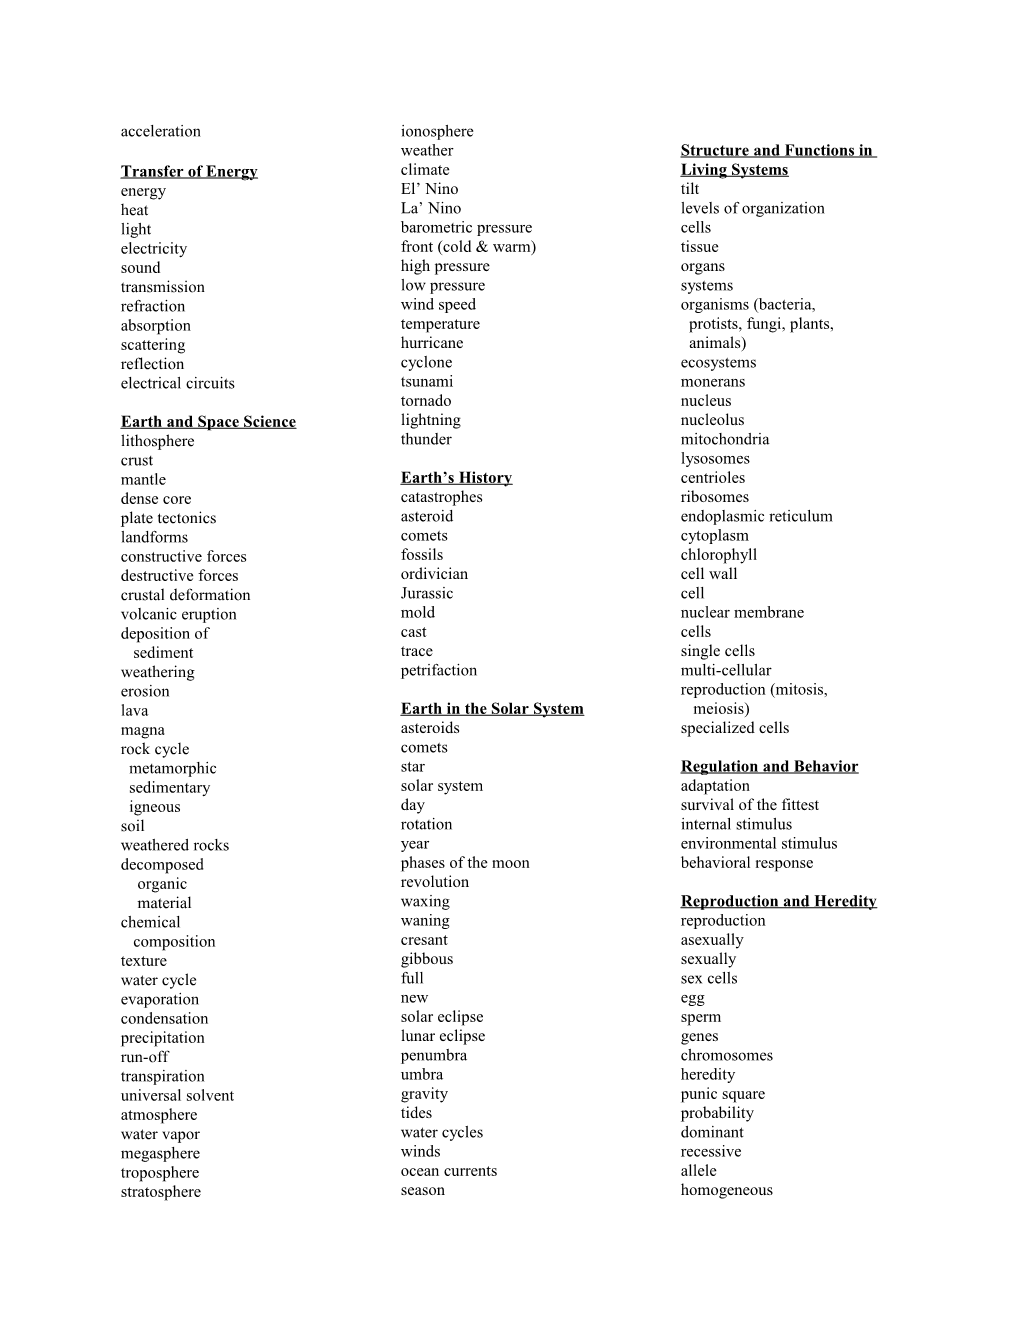 Reading Vocabulary(Middle School)